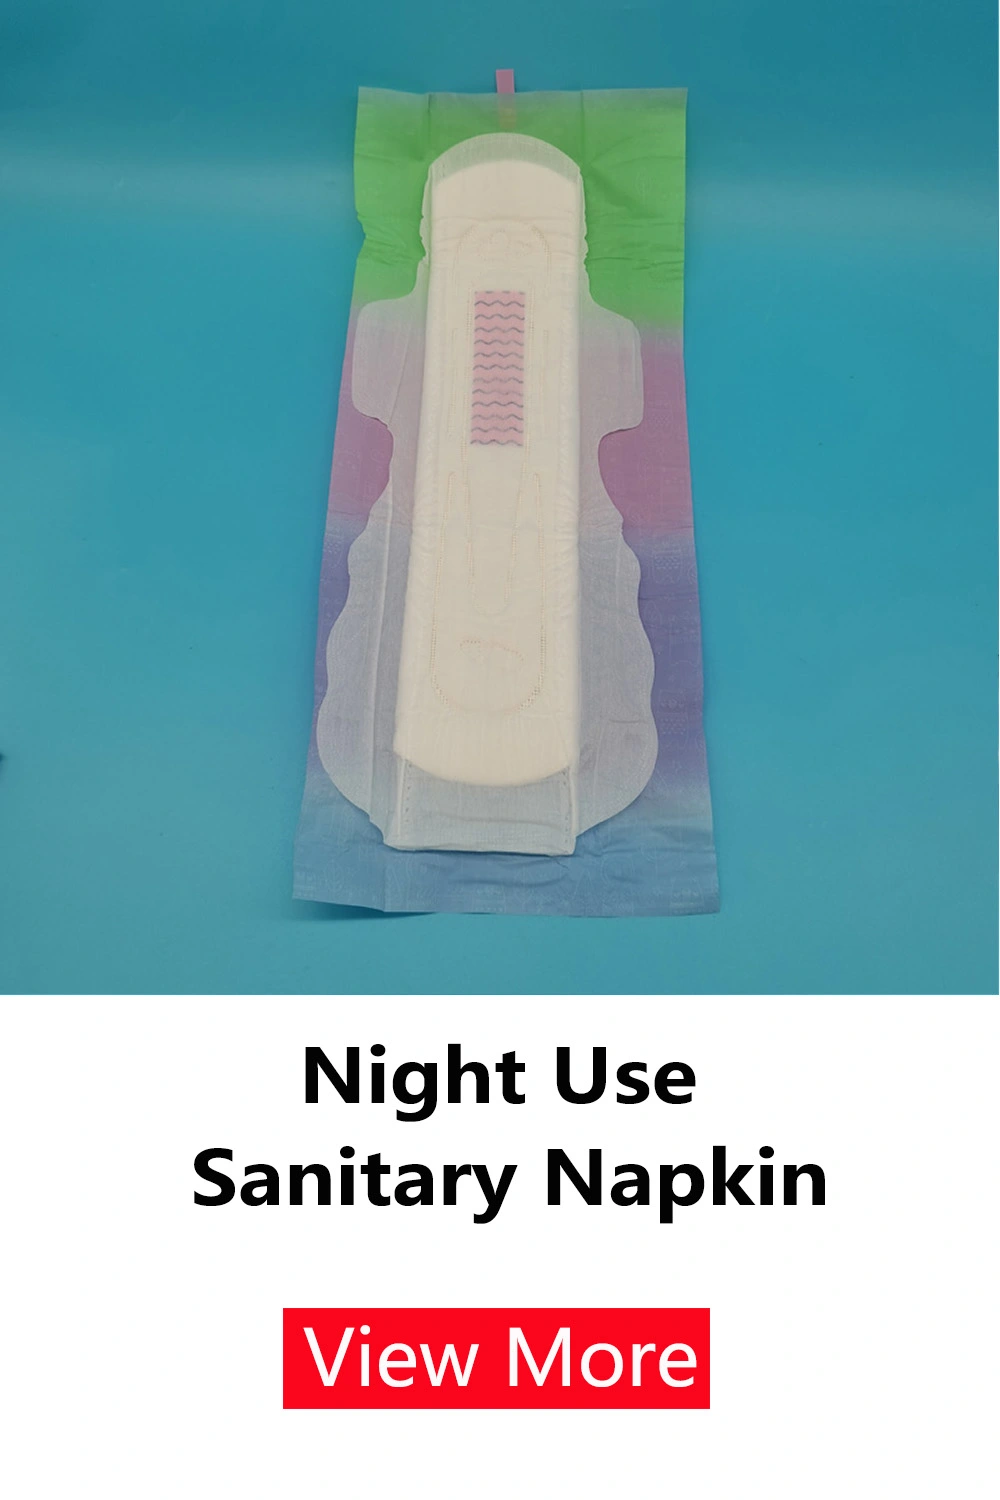 pregnancy towel and sanitary napkin picture